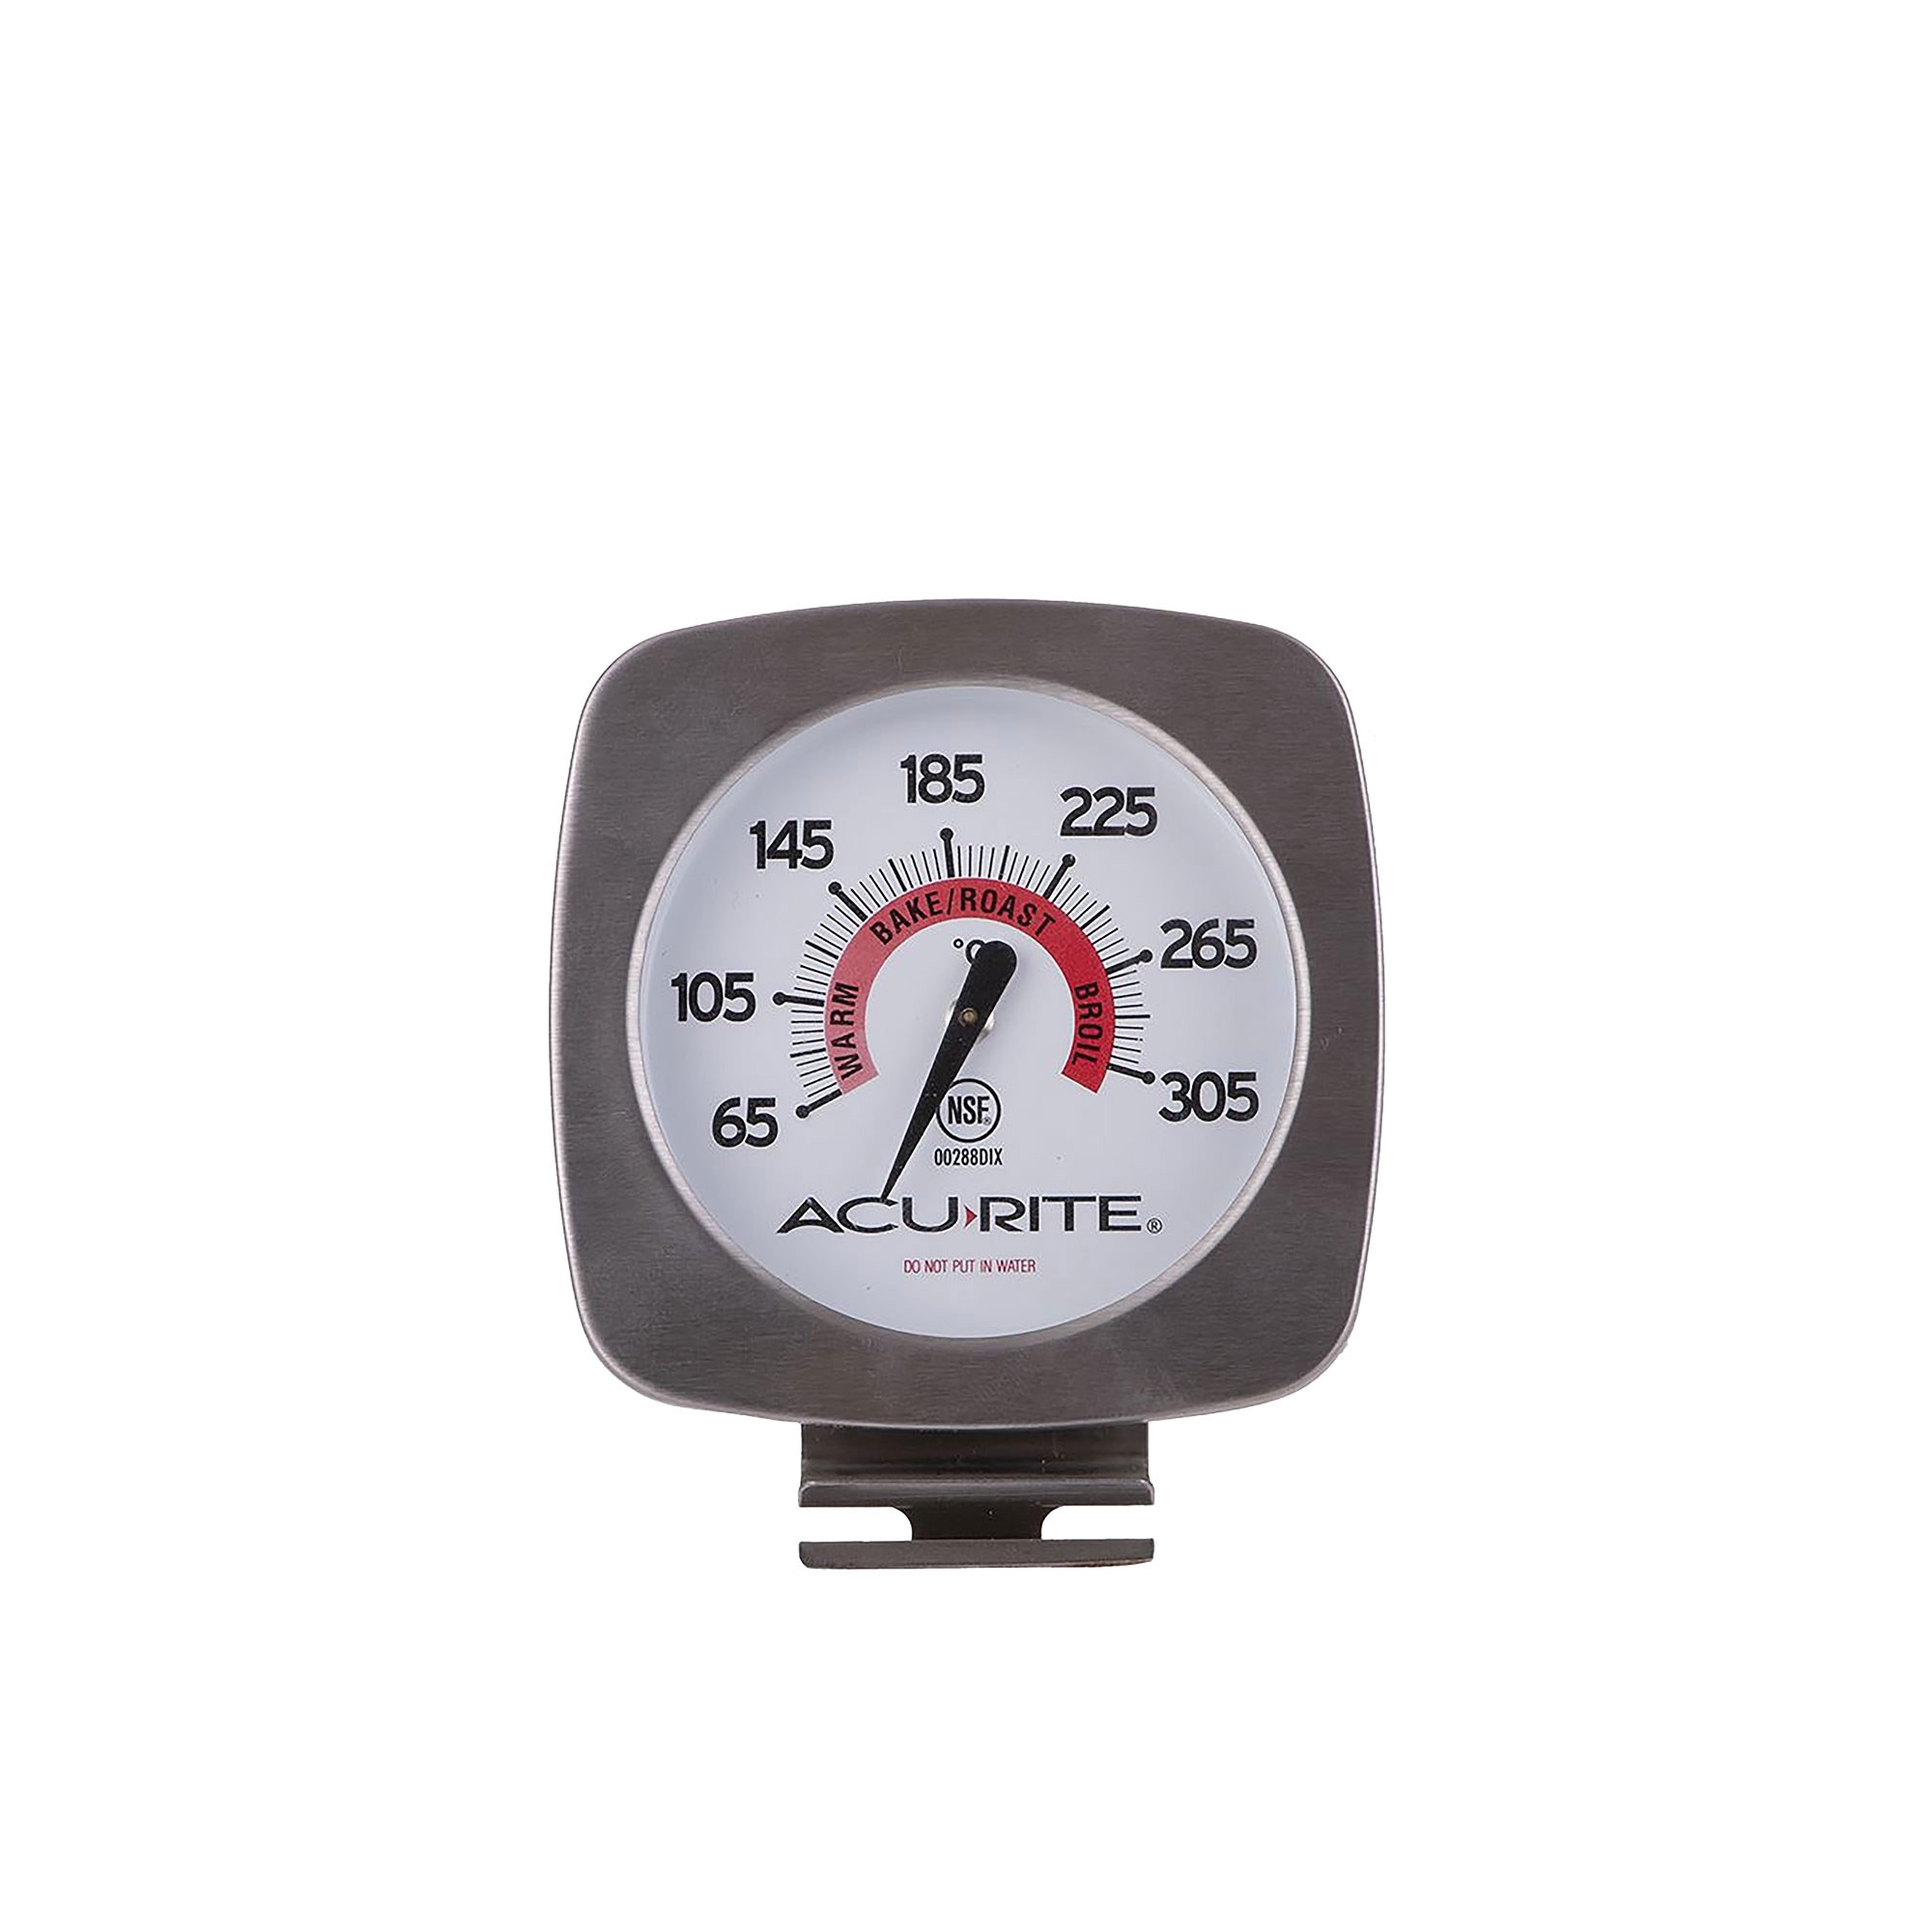 Acurite Gourmet Oven Thermometer Image 1